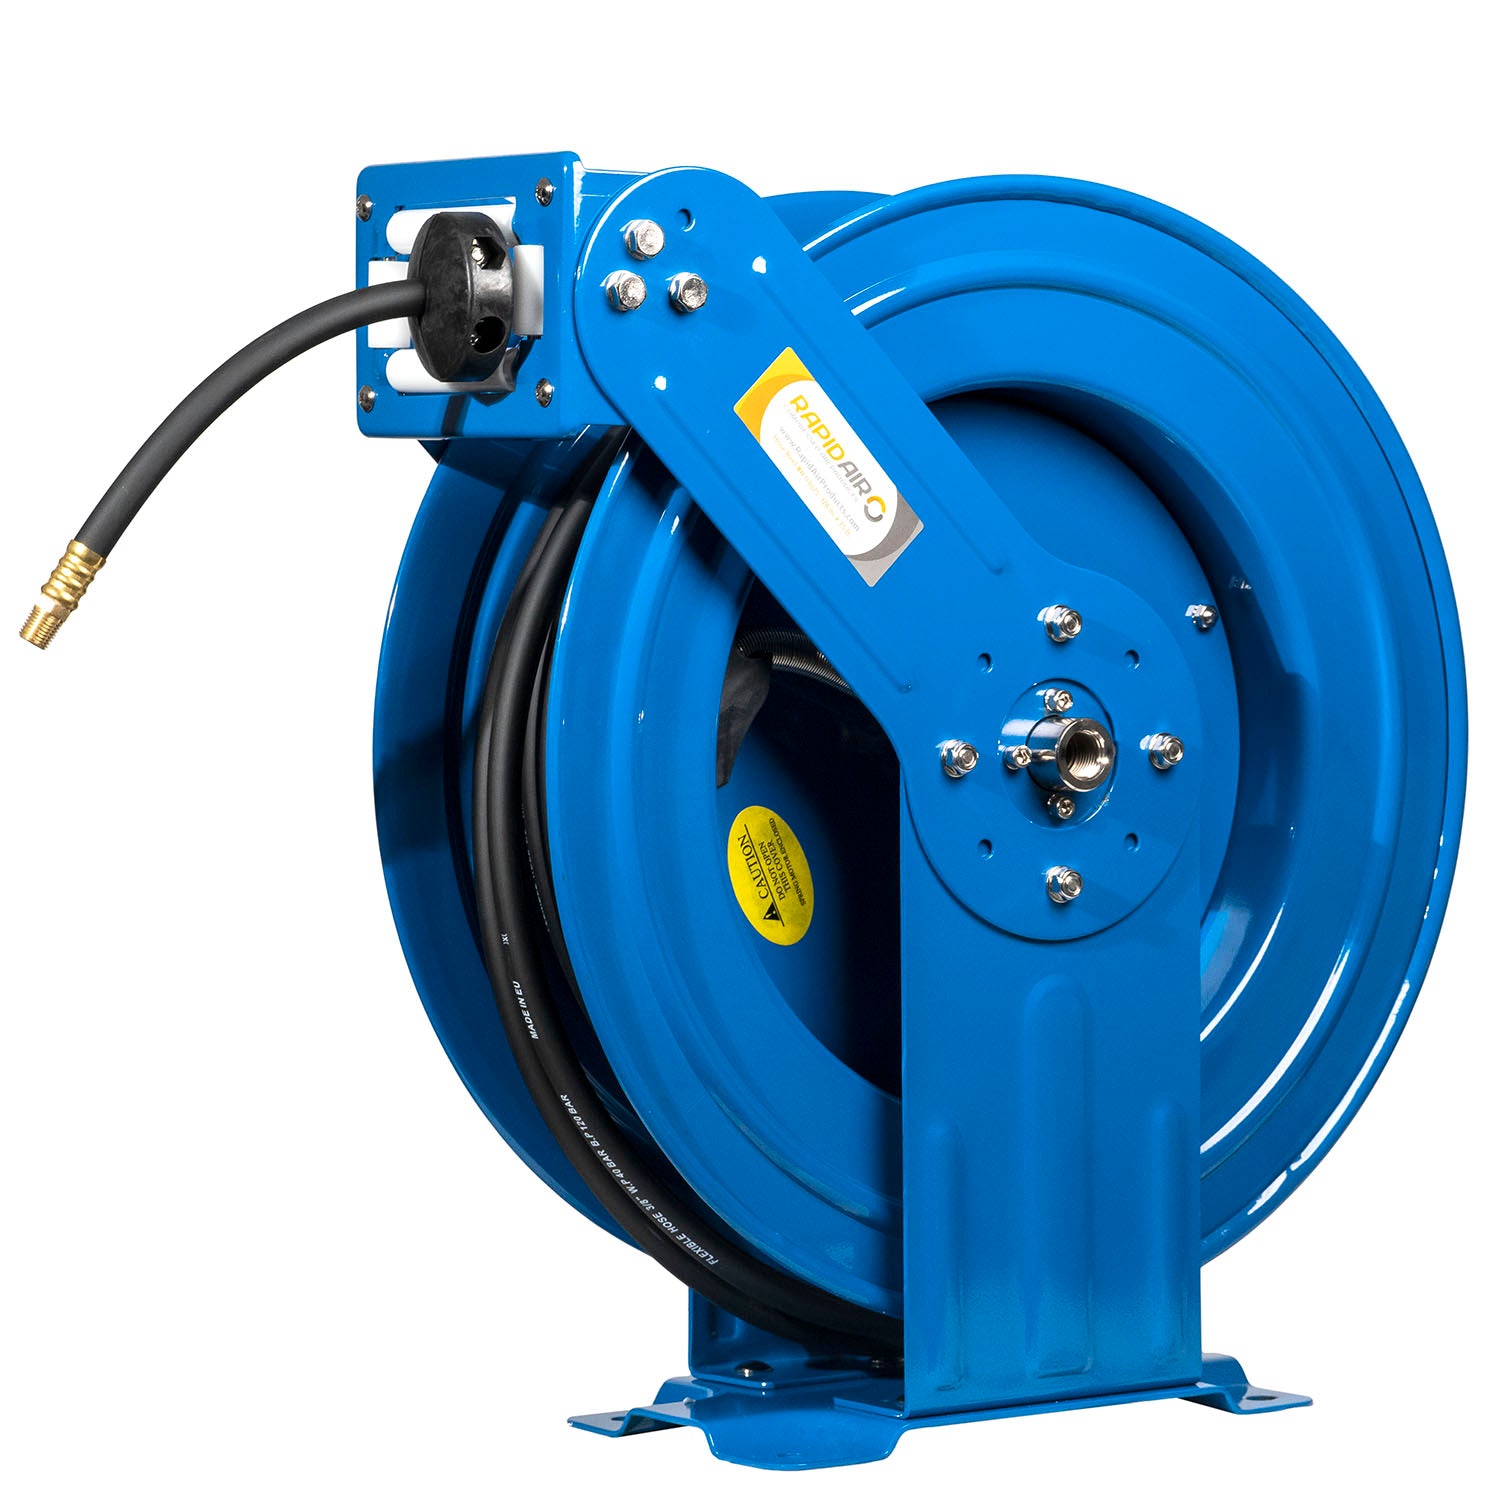 Rapidair 1/2 x 100' Dual Arm Steel Hose Reel 1/2 Inlet and Outlet